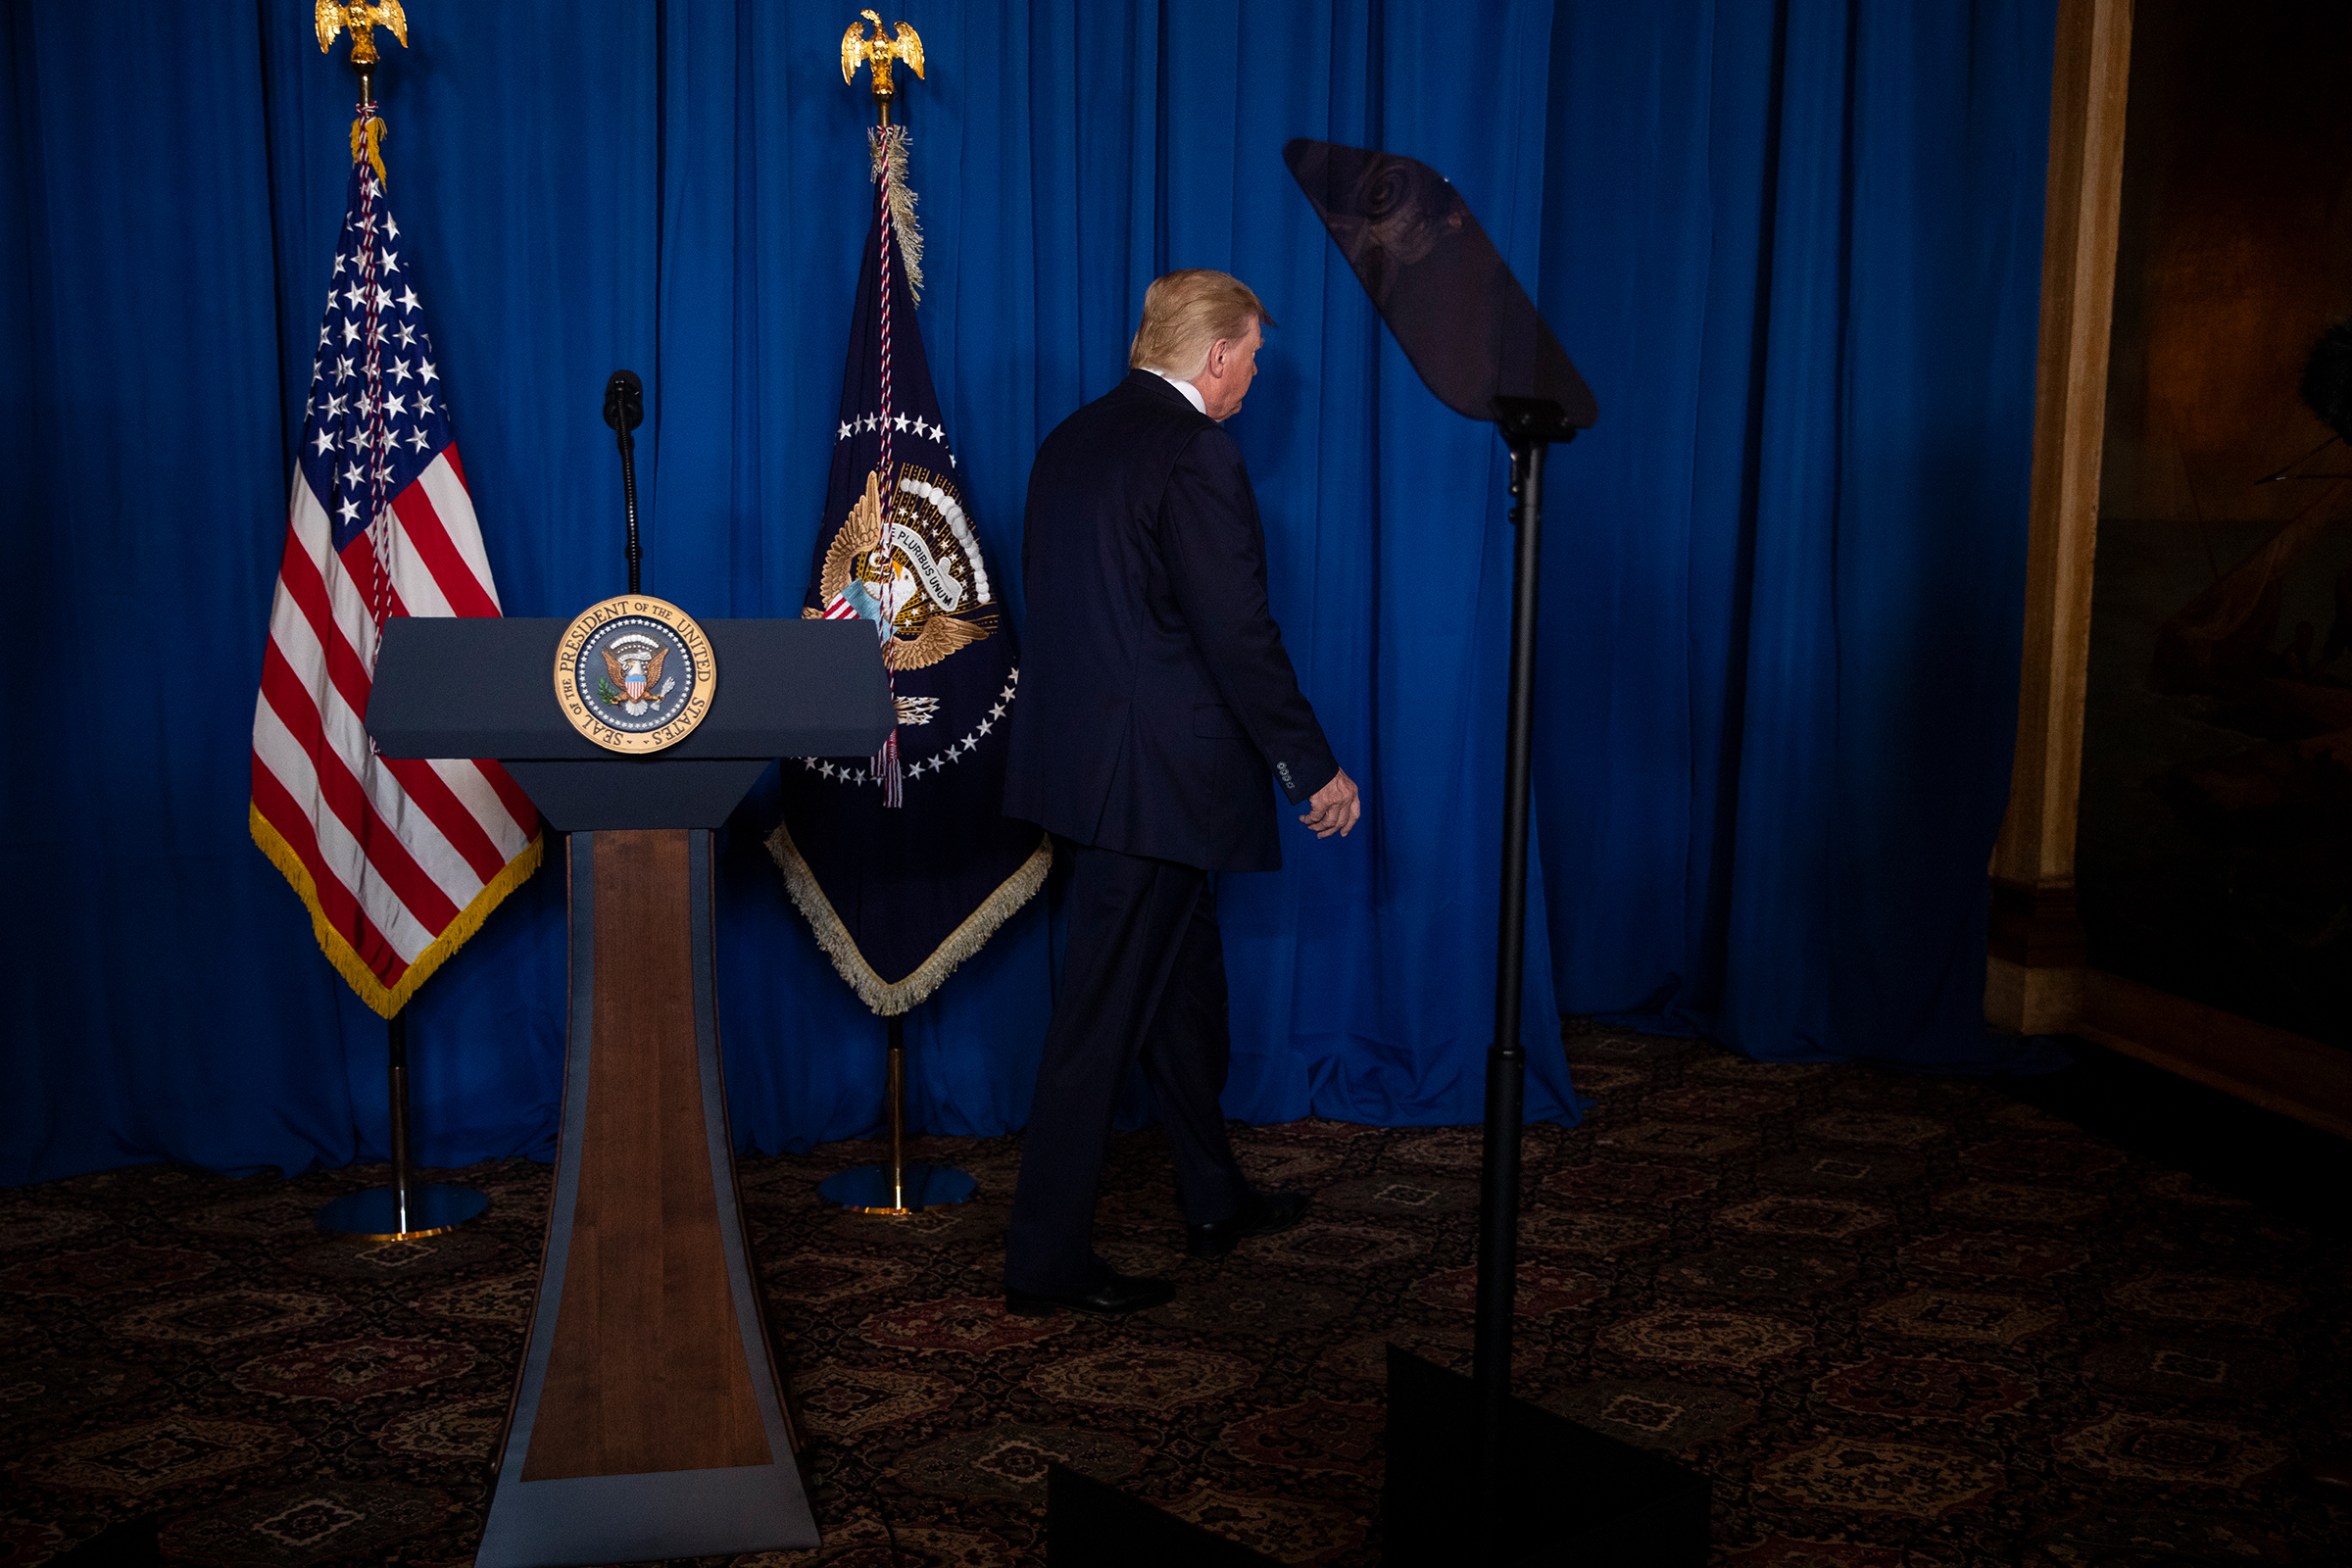 President Trump walks off after delivering remarks on Iran at his Mar-a-Lago property in Palm Beach, Fla., on Jan. 3, 2020. (Evan Vucci—AP)